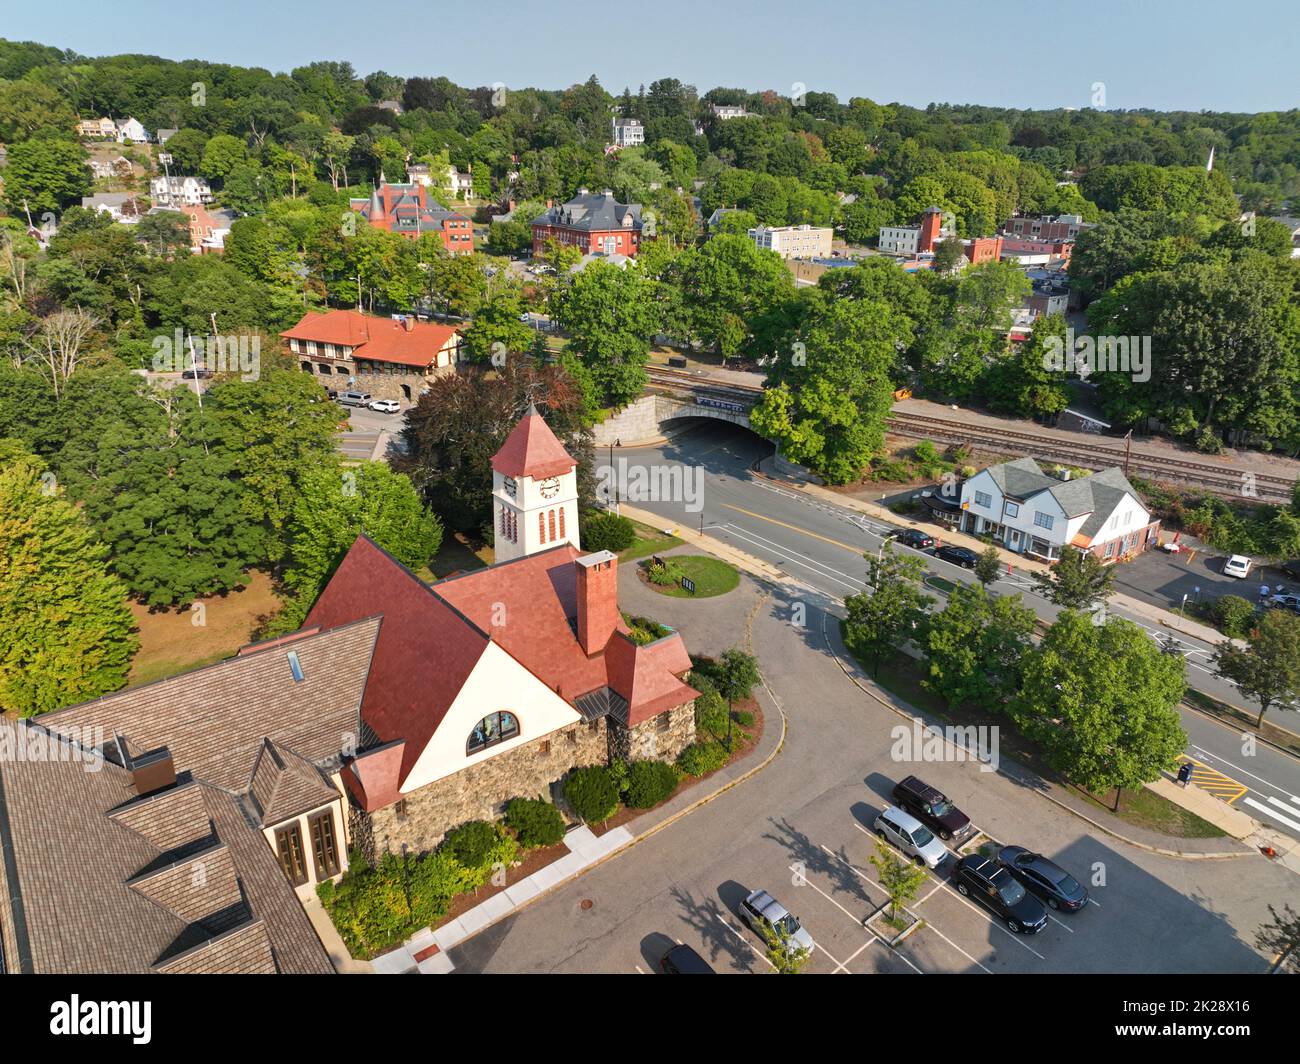 The First Church in Belmont Unitarian Universalist aerial view at 404 Concord Avenue in historic town center of Belmont, Massachusetts MA, USA. Stock Photo